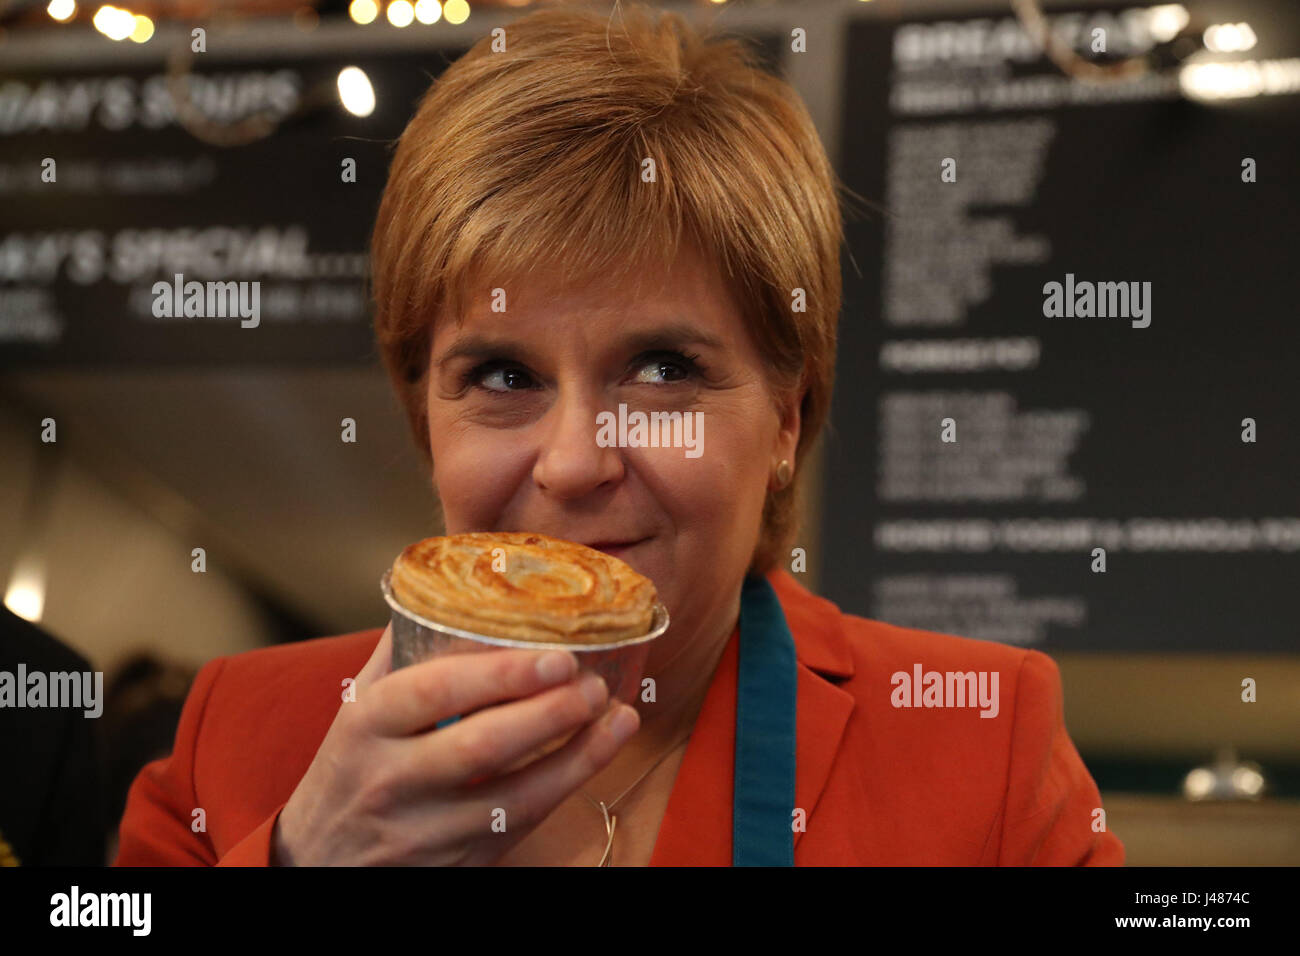 SNP Leader Nicola Sturgeon savours the aroma of a haggis pie featuring the party's logo that she helped to make on a campaign visit to Table 13 Express in Kirkintilloch, East Dunbartonshire. Stock Photo